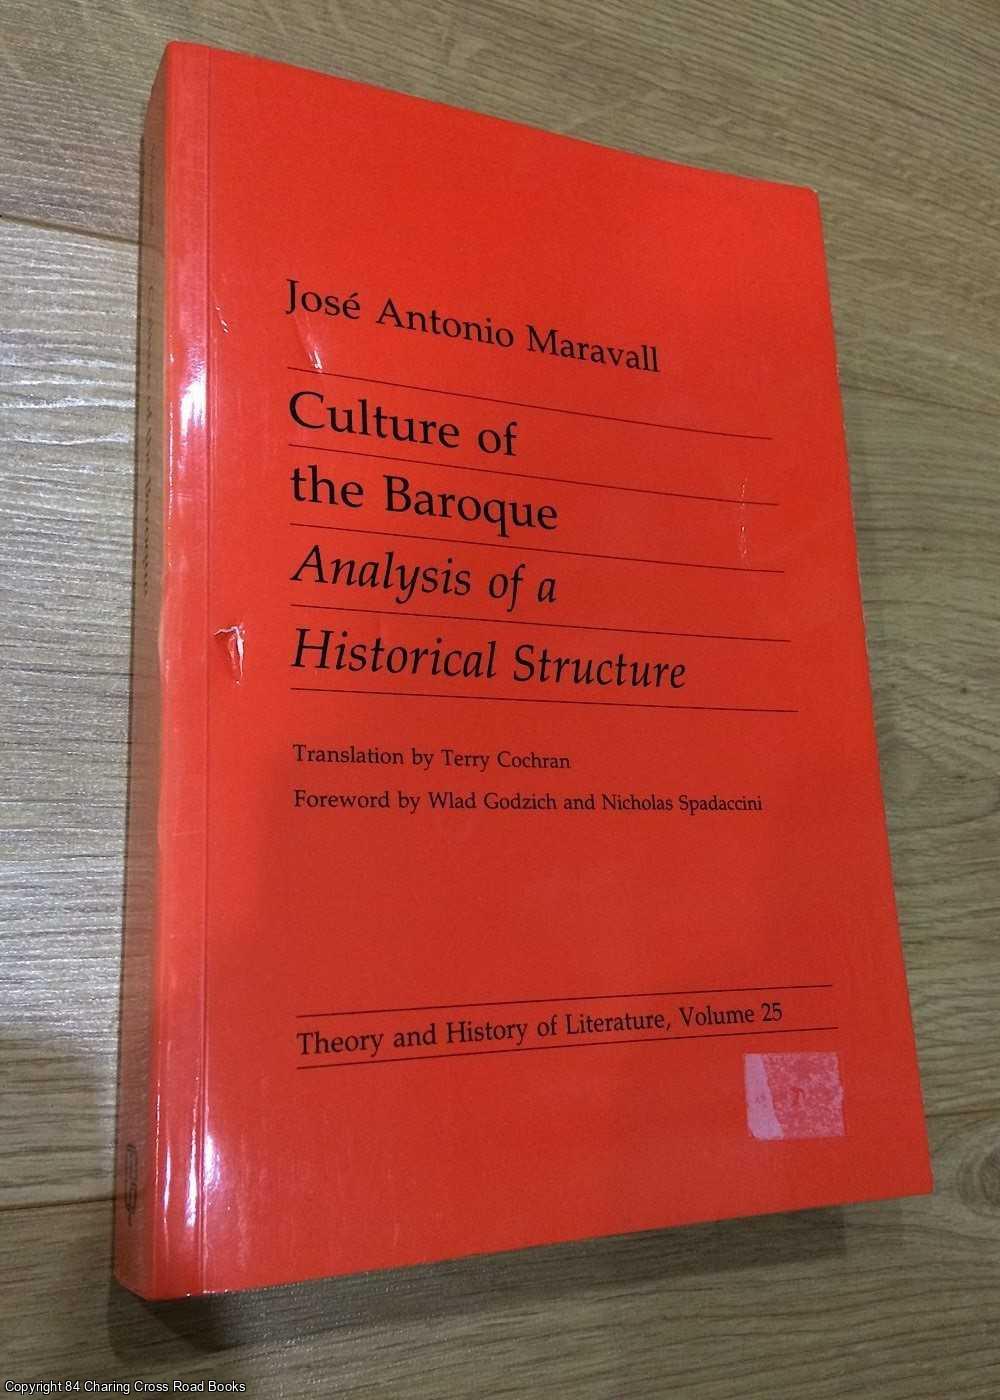 Maravall, Jose Antonio - Culture of the Baroque: Analysis of a Historical Structure